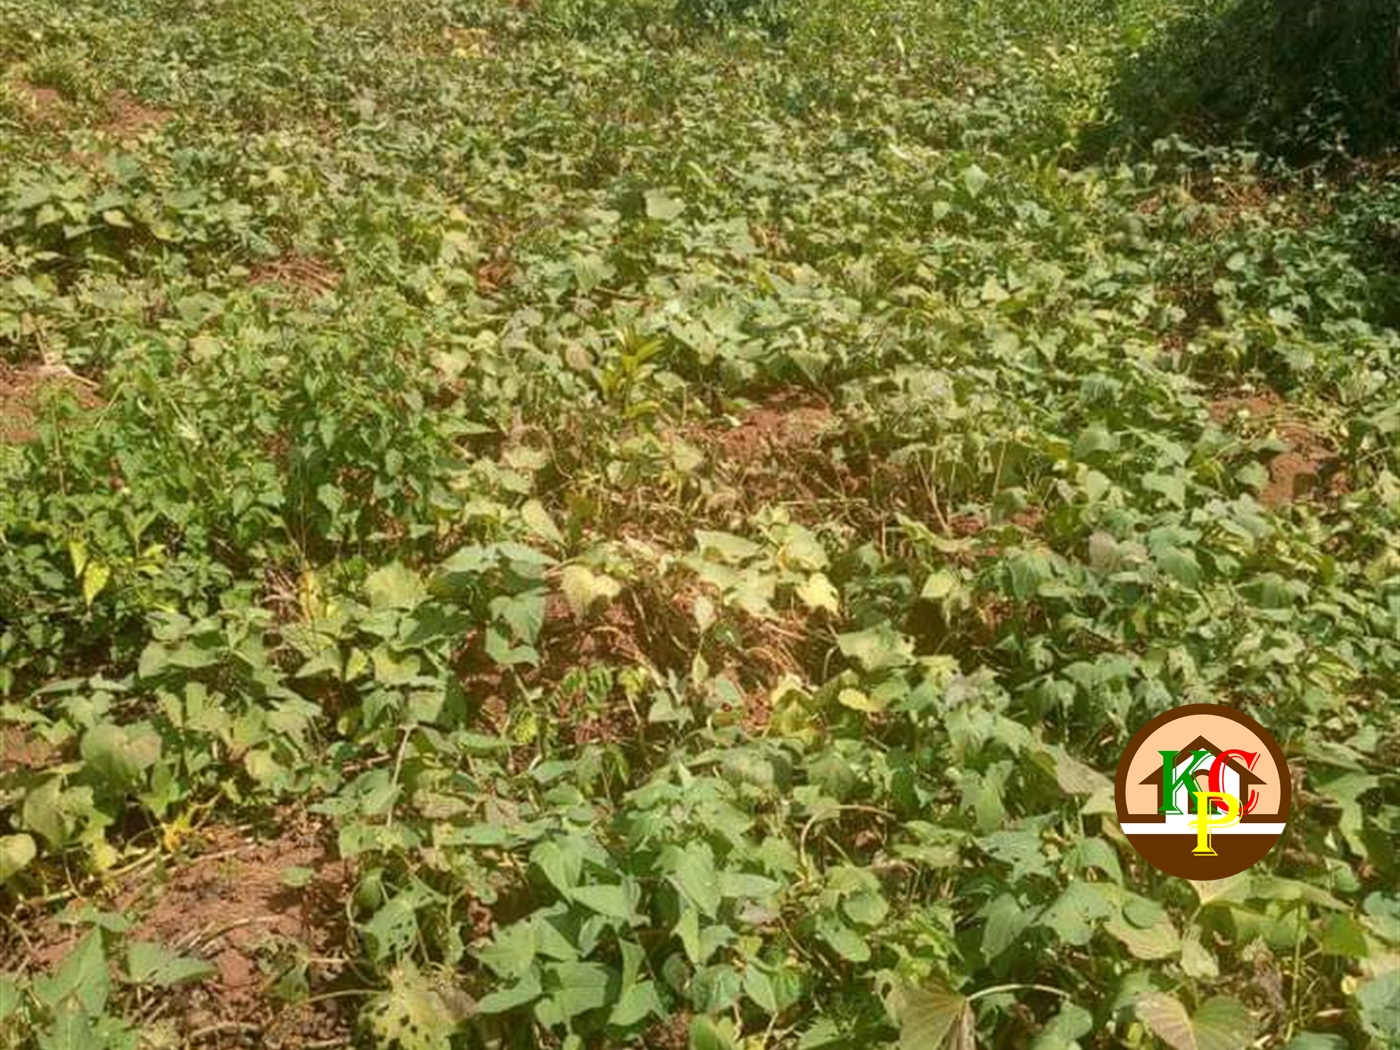 Residential Land for sale in Katugo Luweero